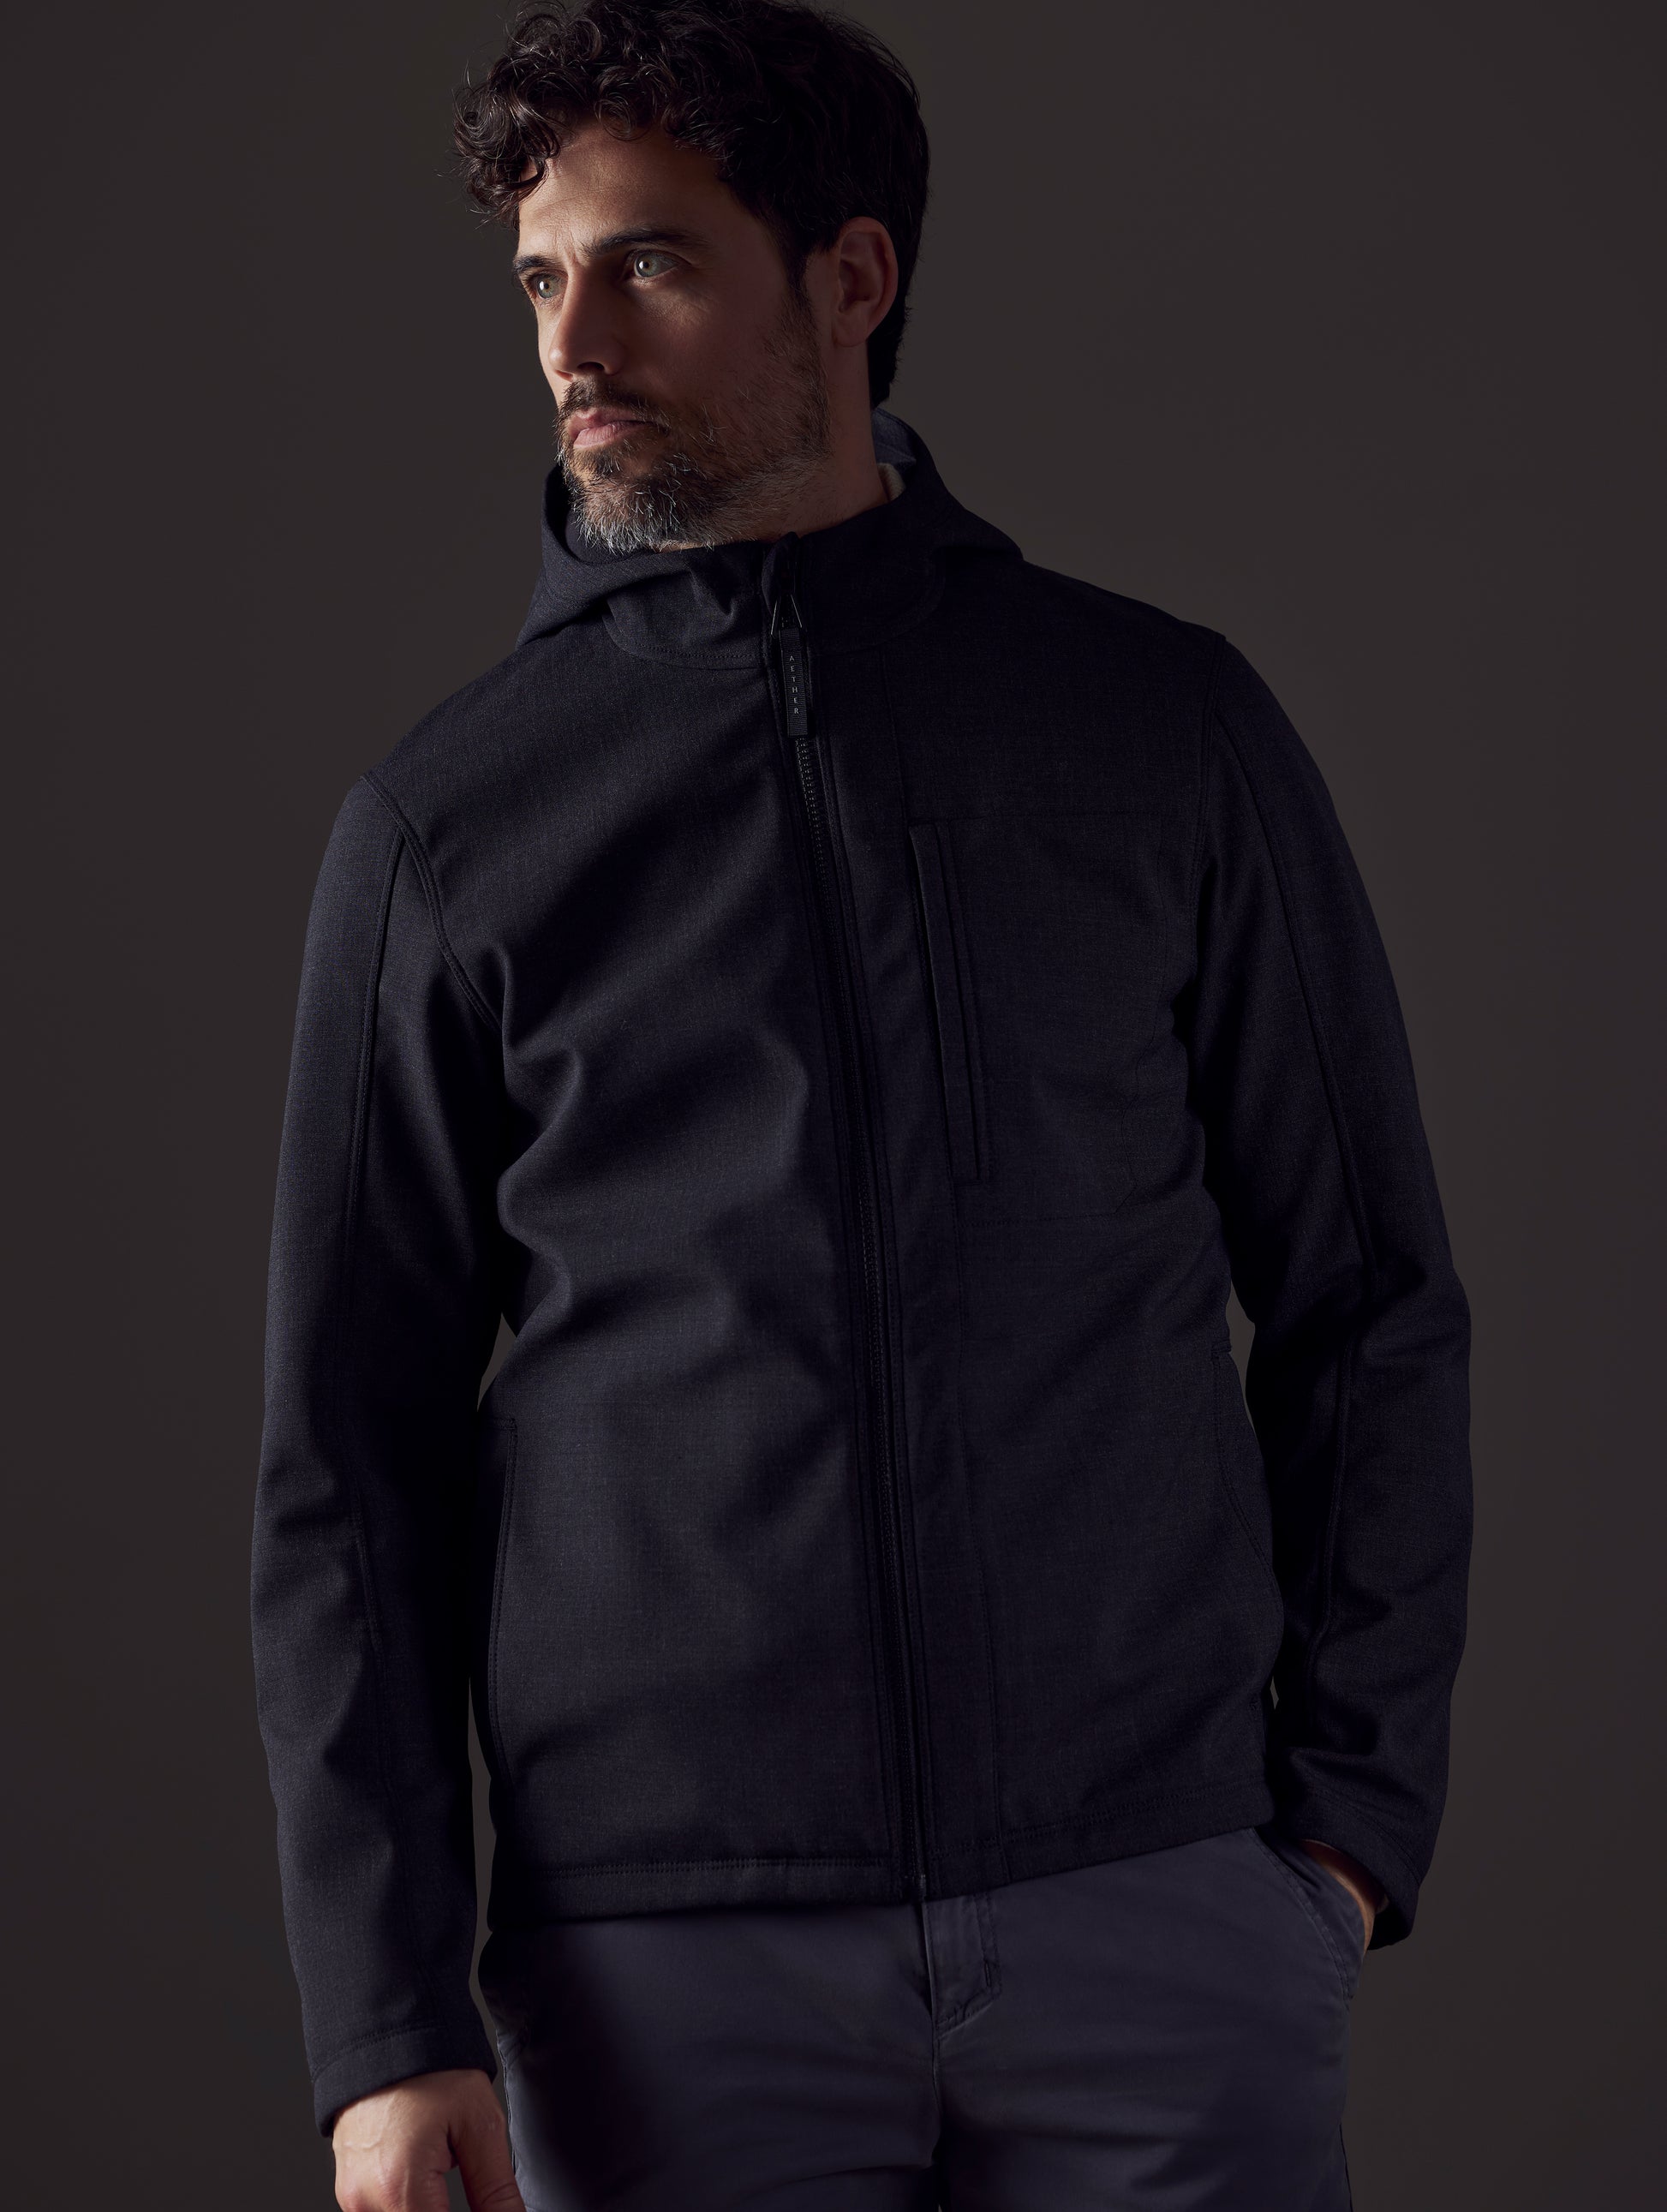 Man wearing dark grey technical jacket from AETHER Apparel